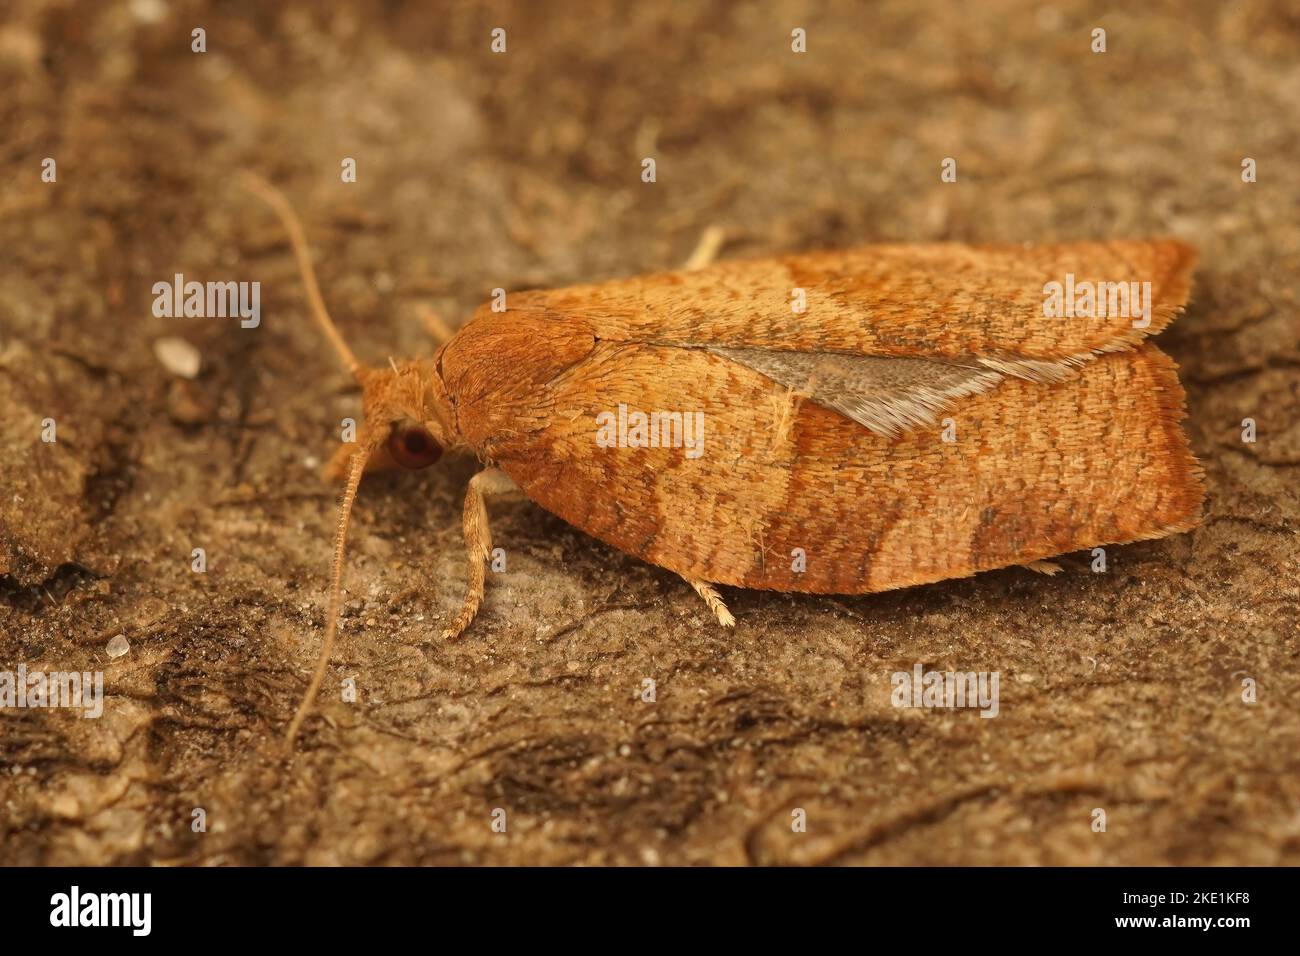 A closeup of a tortricid moth (pandemis heparana) isolated on a wooden surface Stock Photo